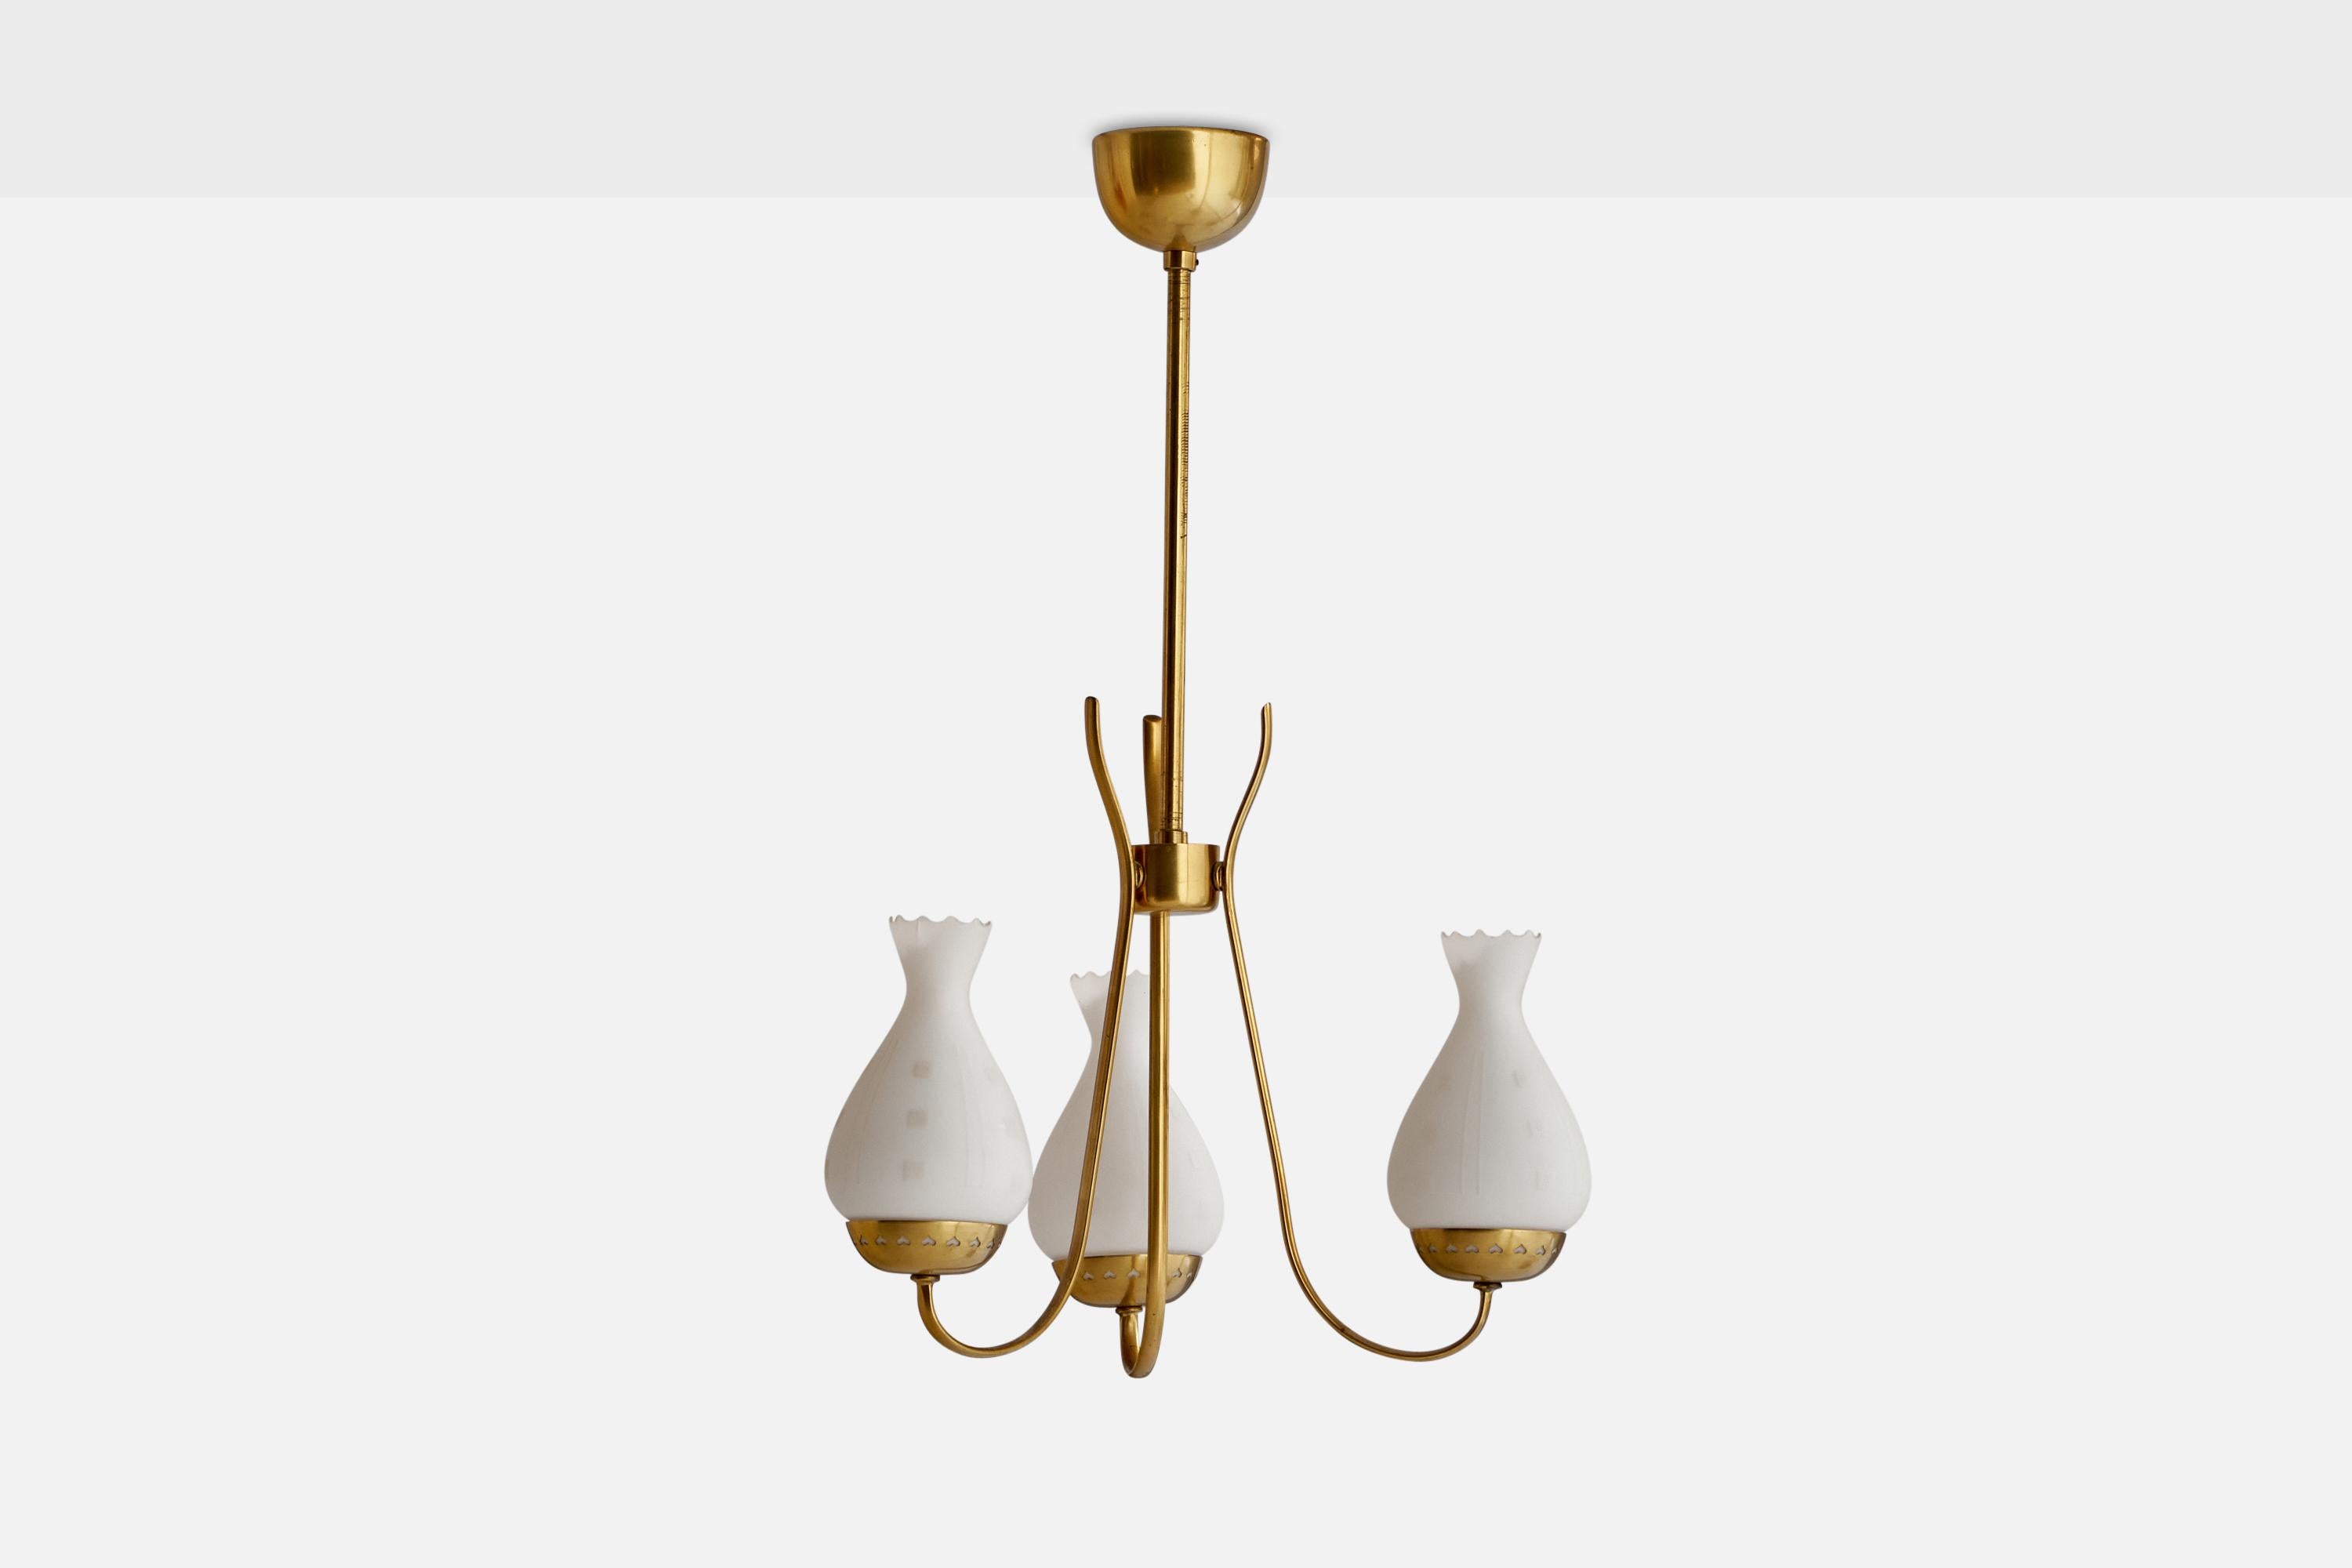 A brass and opaline glass chandelier designed and produced in Sweden, 1940s.

Dimensions of canopy (inches): 2.5” H x 3.8” Diameter
Socket takes standard E-26 bulbs. 3 sockets.There is no maximum wattage stated on the fixture. All lighting will be